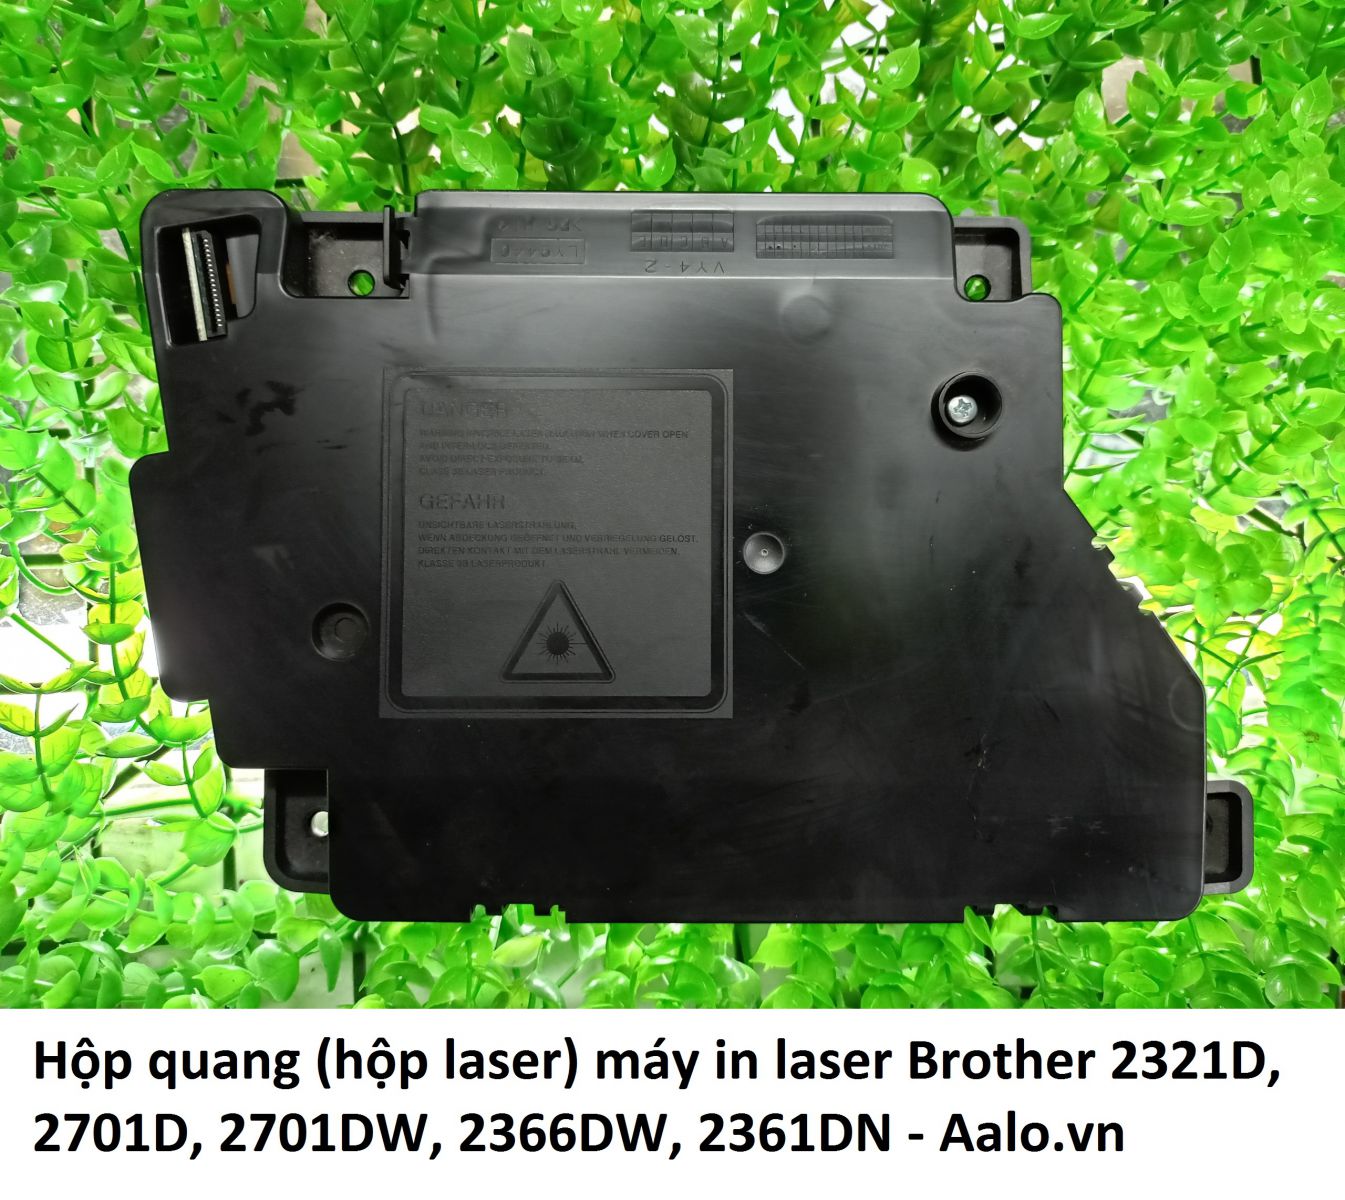 Hộp quang (hộp laser) máy in laser Brother 2321D, 2701D, 2701DW, 2366DW, 2361DN - Aalo.vn